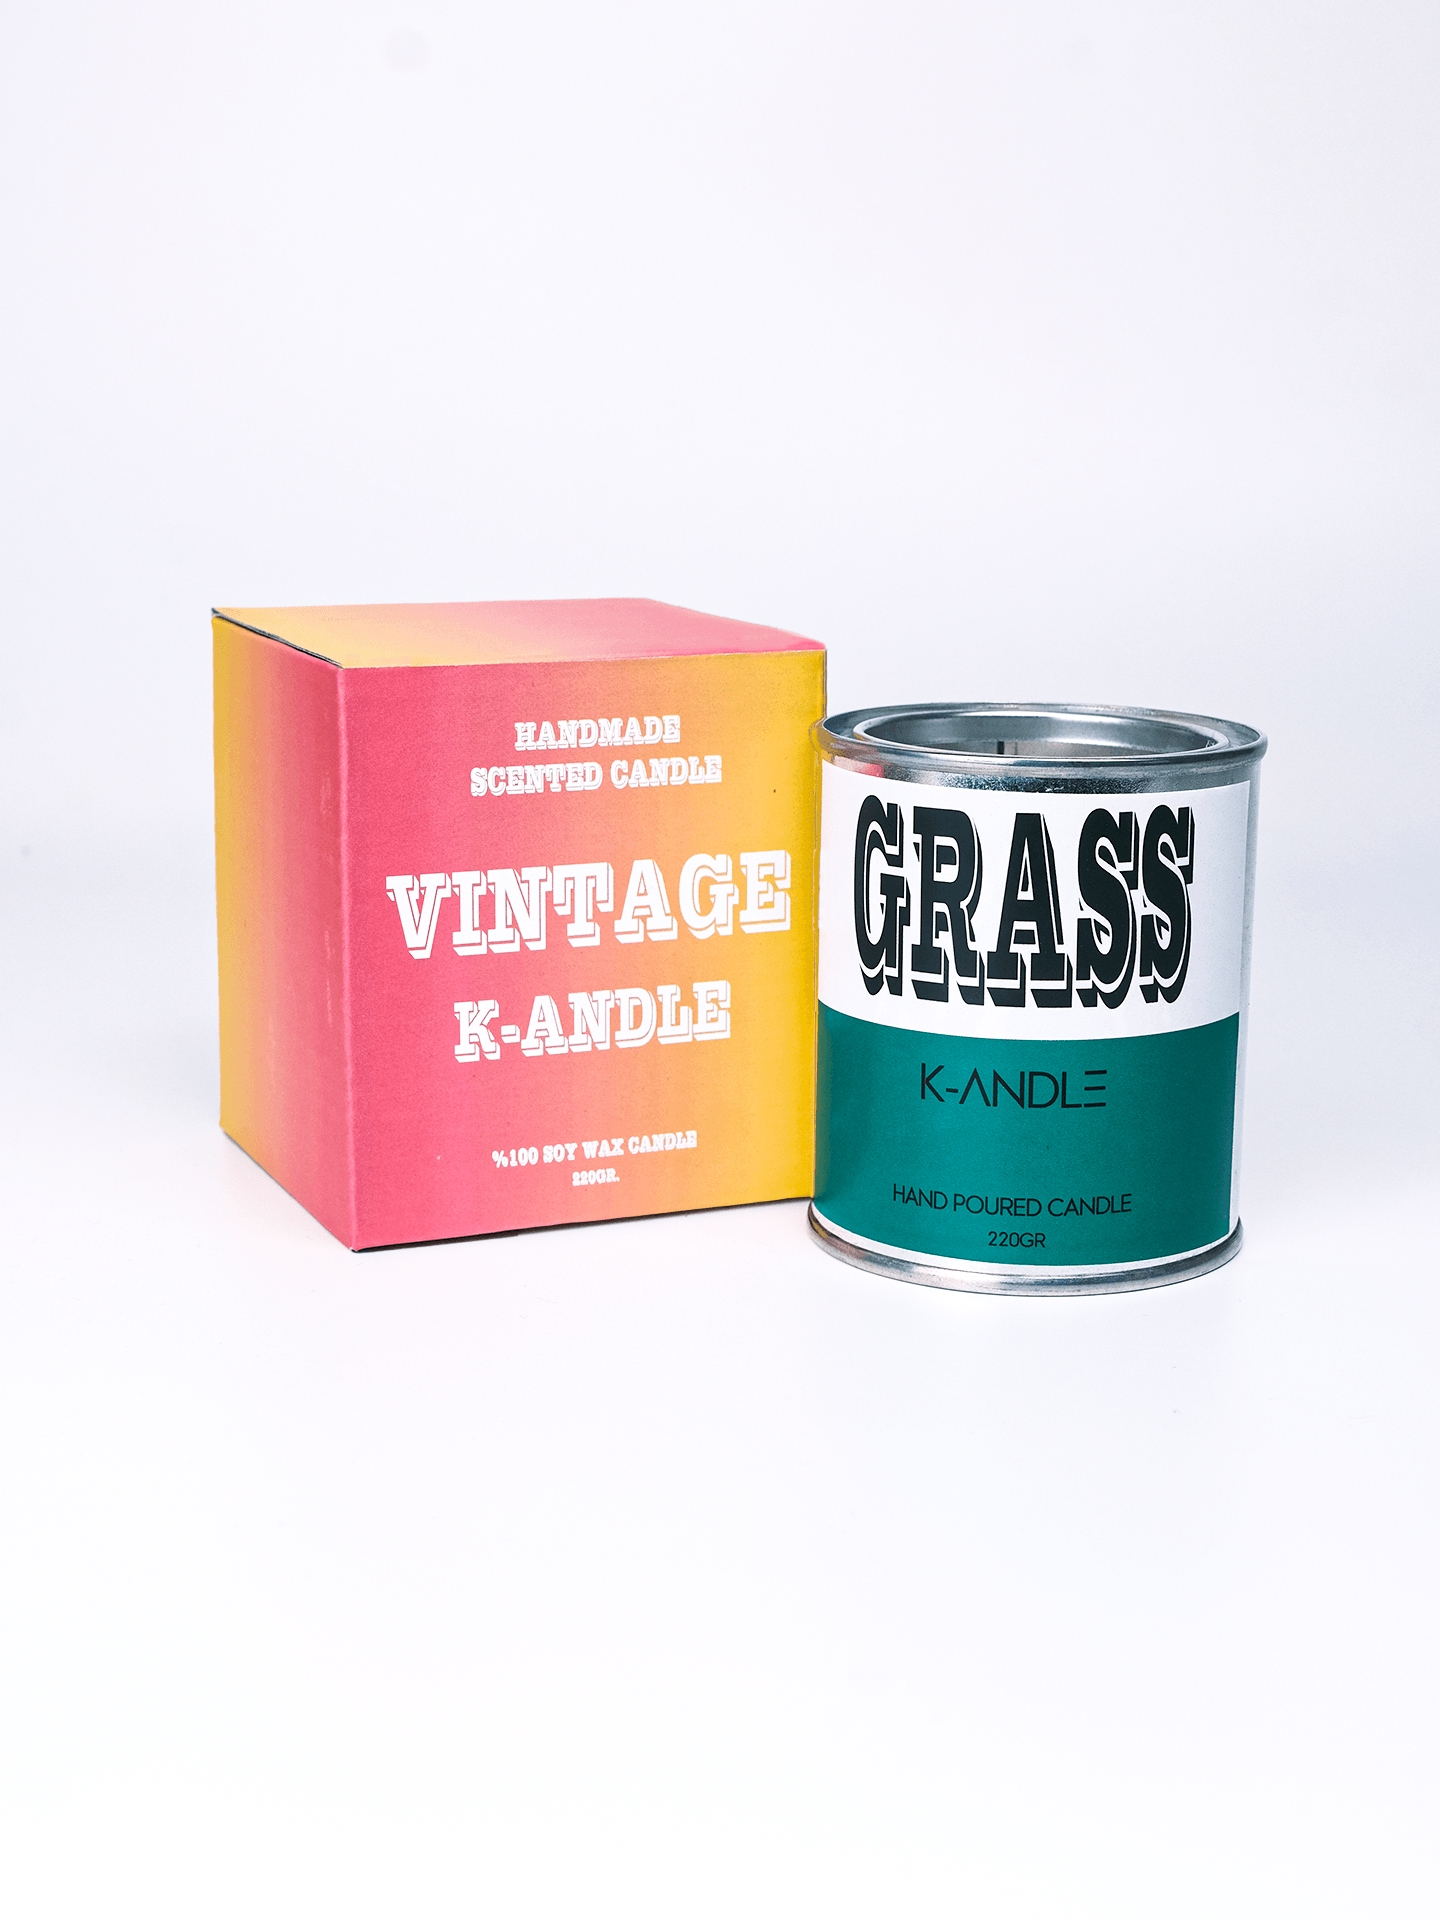 Vintage Grass Soy Candle